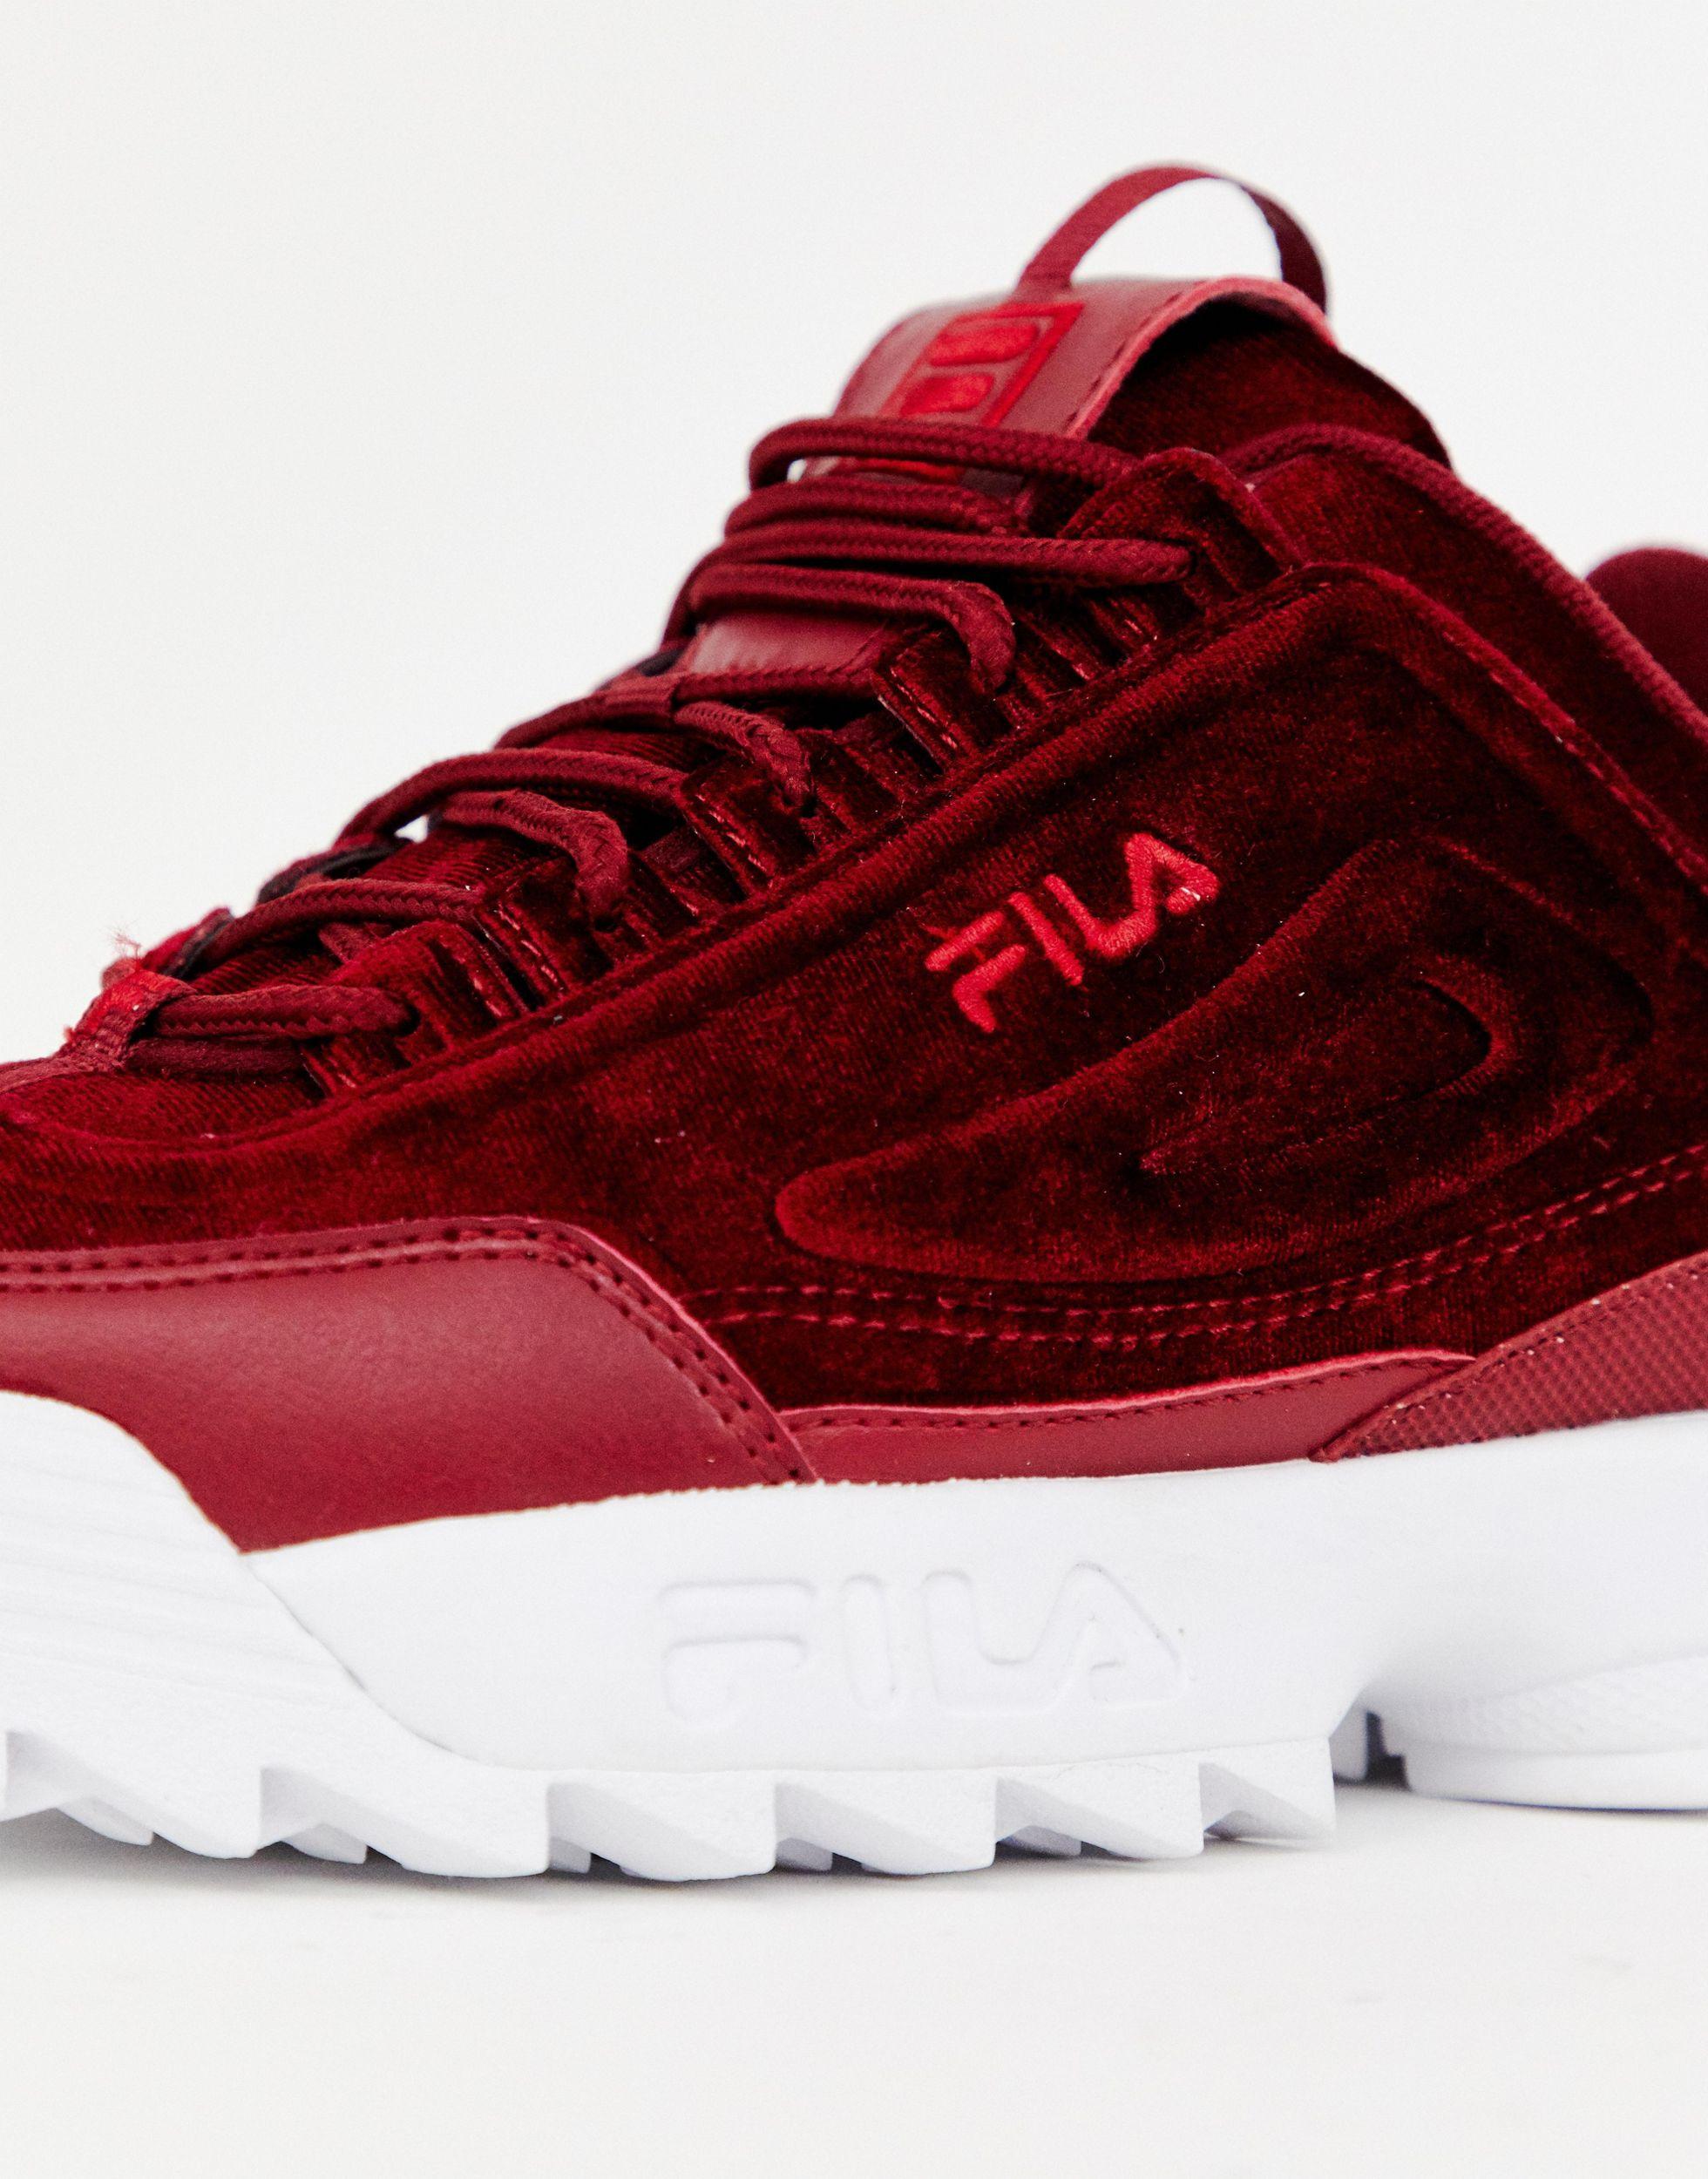 Fila Leather Burgundy Disruptor Ii Premium Velour Trainers in Red - Lyst